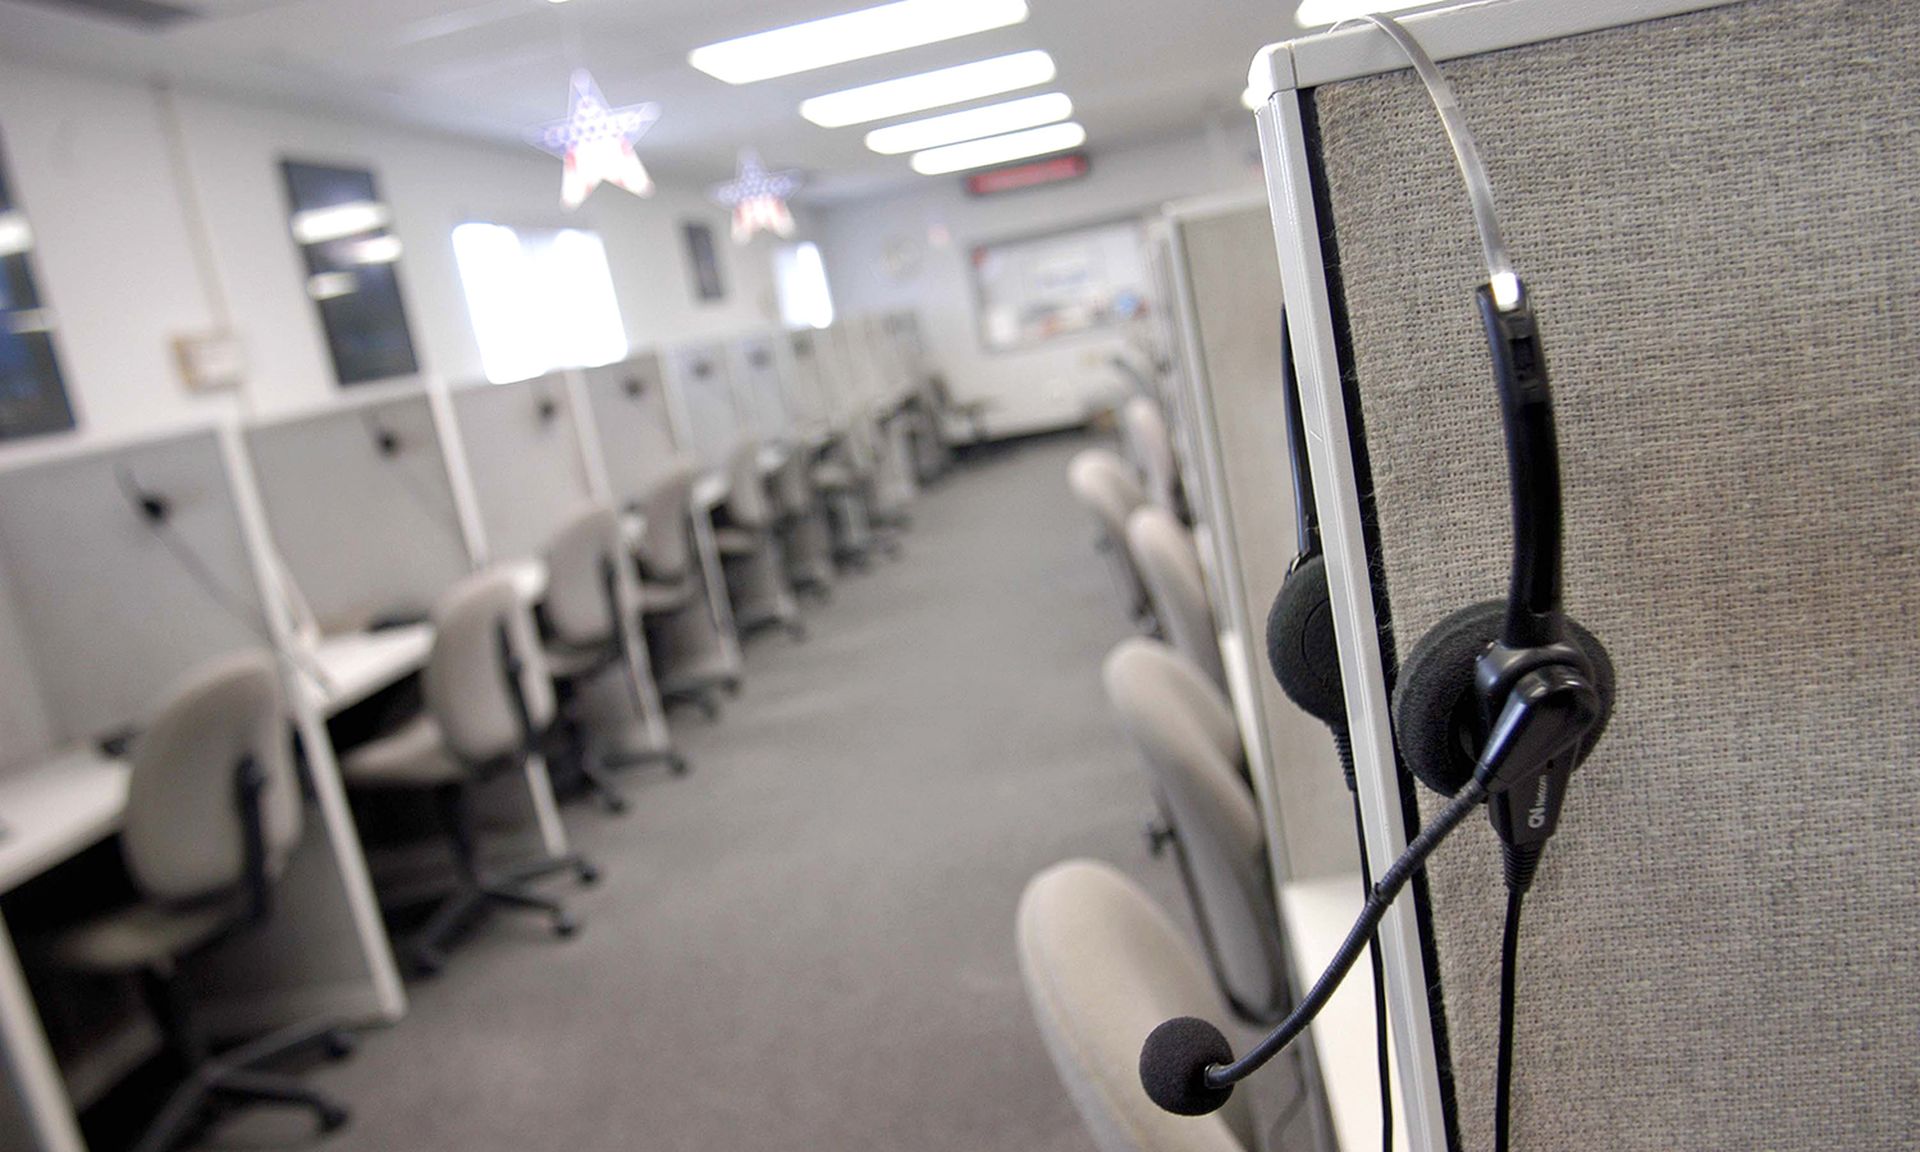 A headset hangs on a cubical wall on Sept. 26, 2003, in Philadelphia. (Photo by William Thomas Cain/Getty Images)